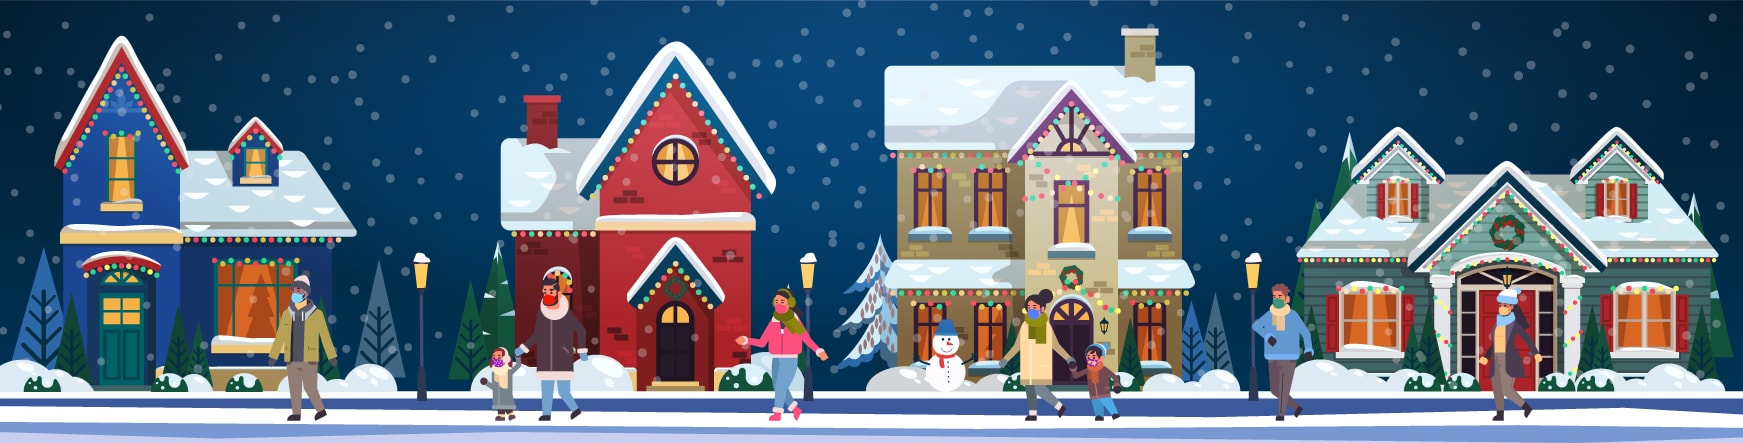 Several people are shown outdoors walking through a neighborhood where the houses are decorated. Each person/family is maintaining their distance from the other people/families.